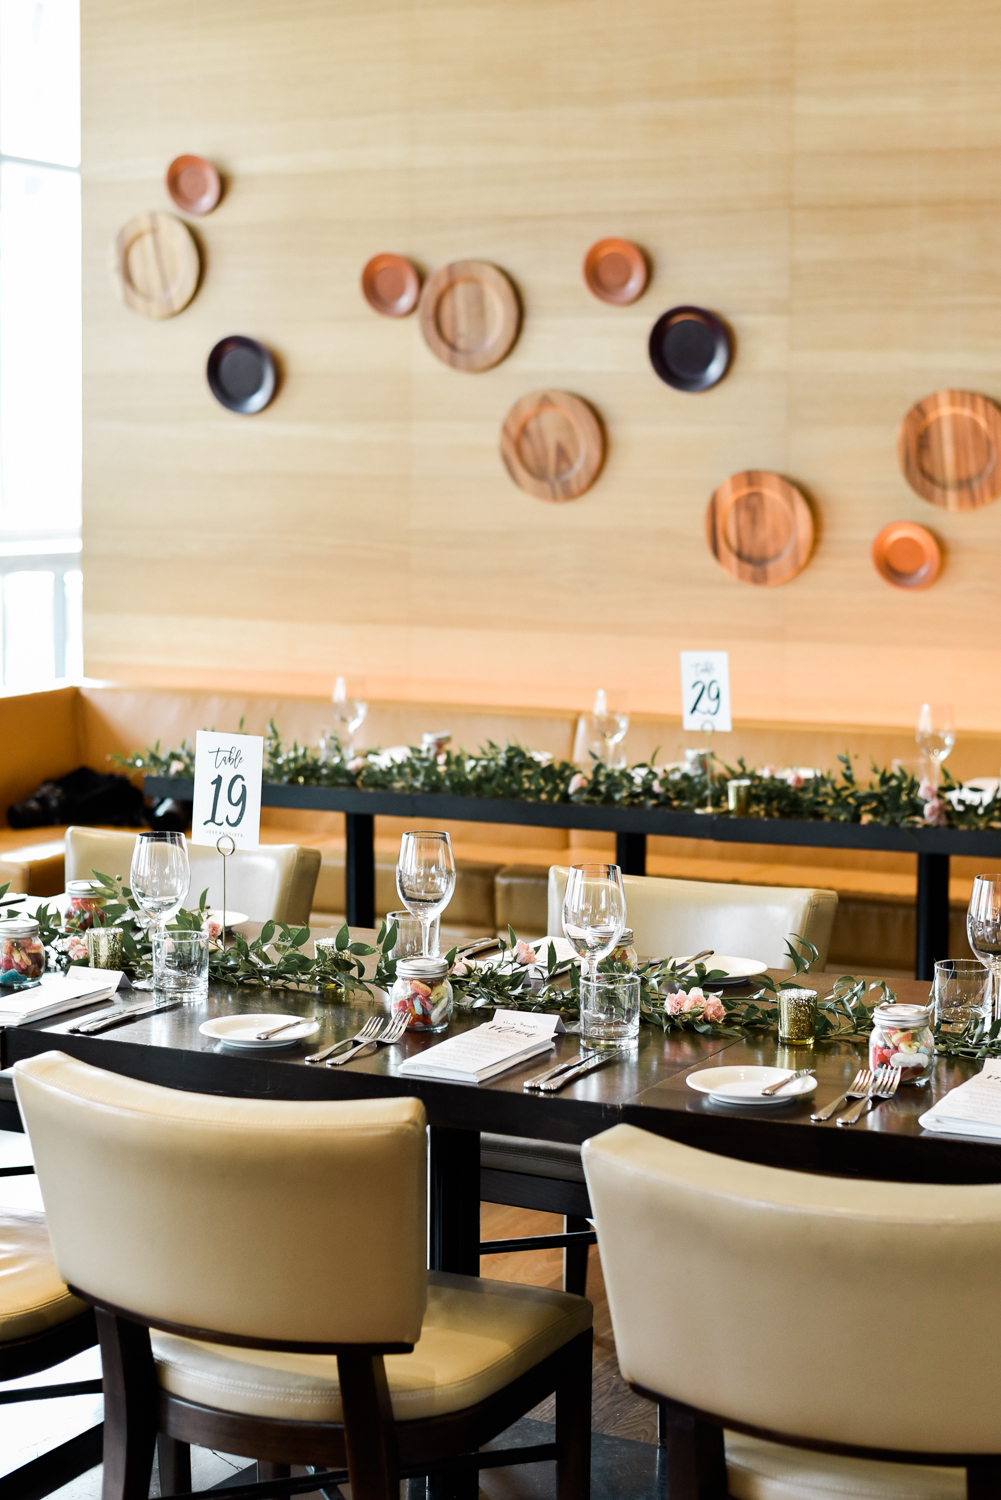 Wedding table decor at Luma Restaurant by Cool Green and Shady. Simple green garlands and Jays themed table numbers.